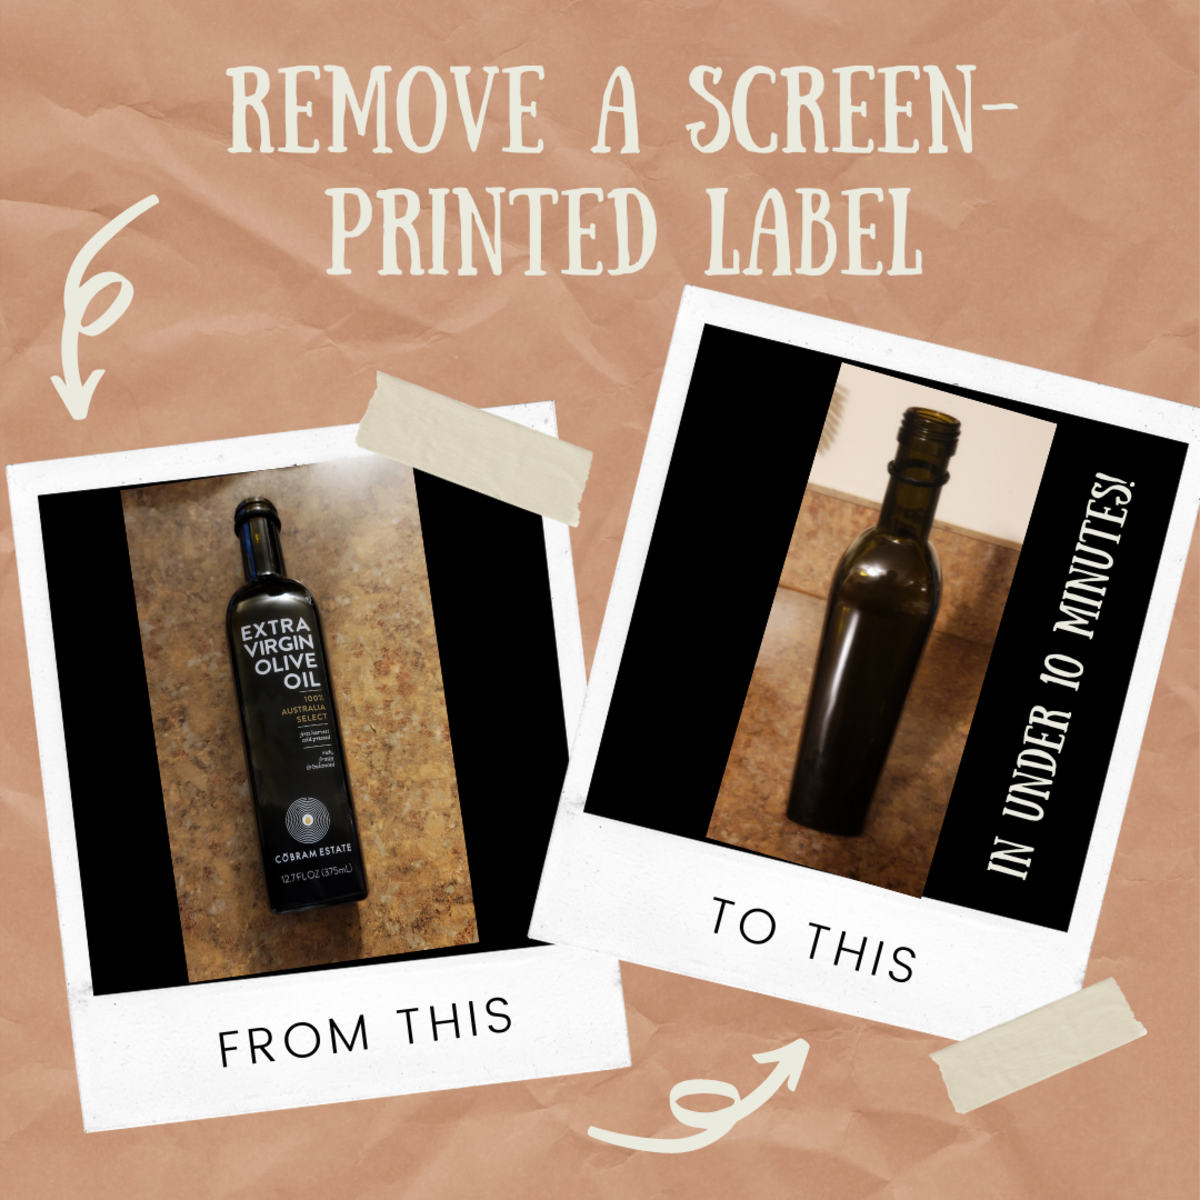 How to Remove a Screen-Printed Label From a Glass Bottle in Under 10 Minutes